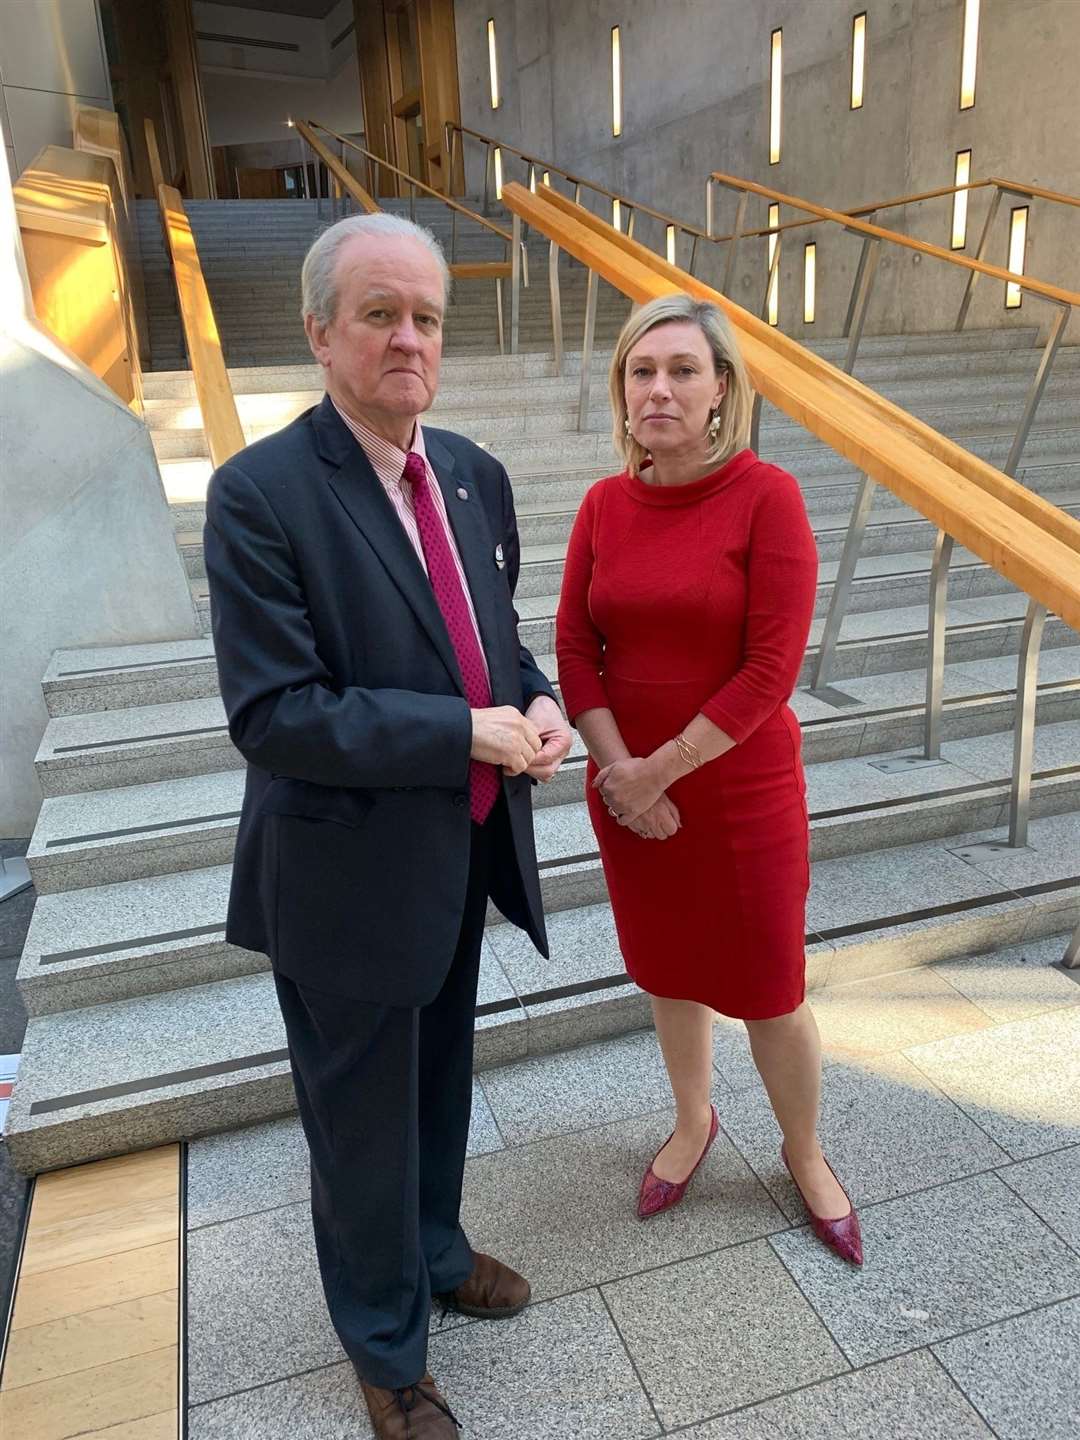 North-east MSPs Gillian Martin and Stewart Stevenson have welcomed the consultation.